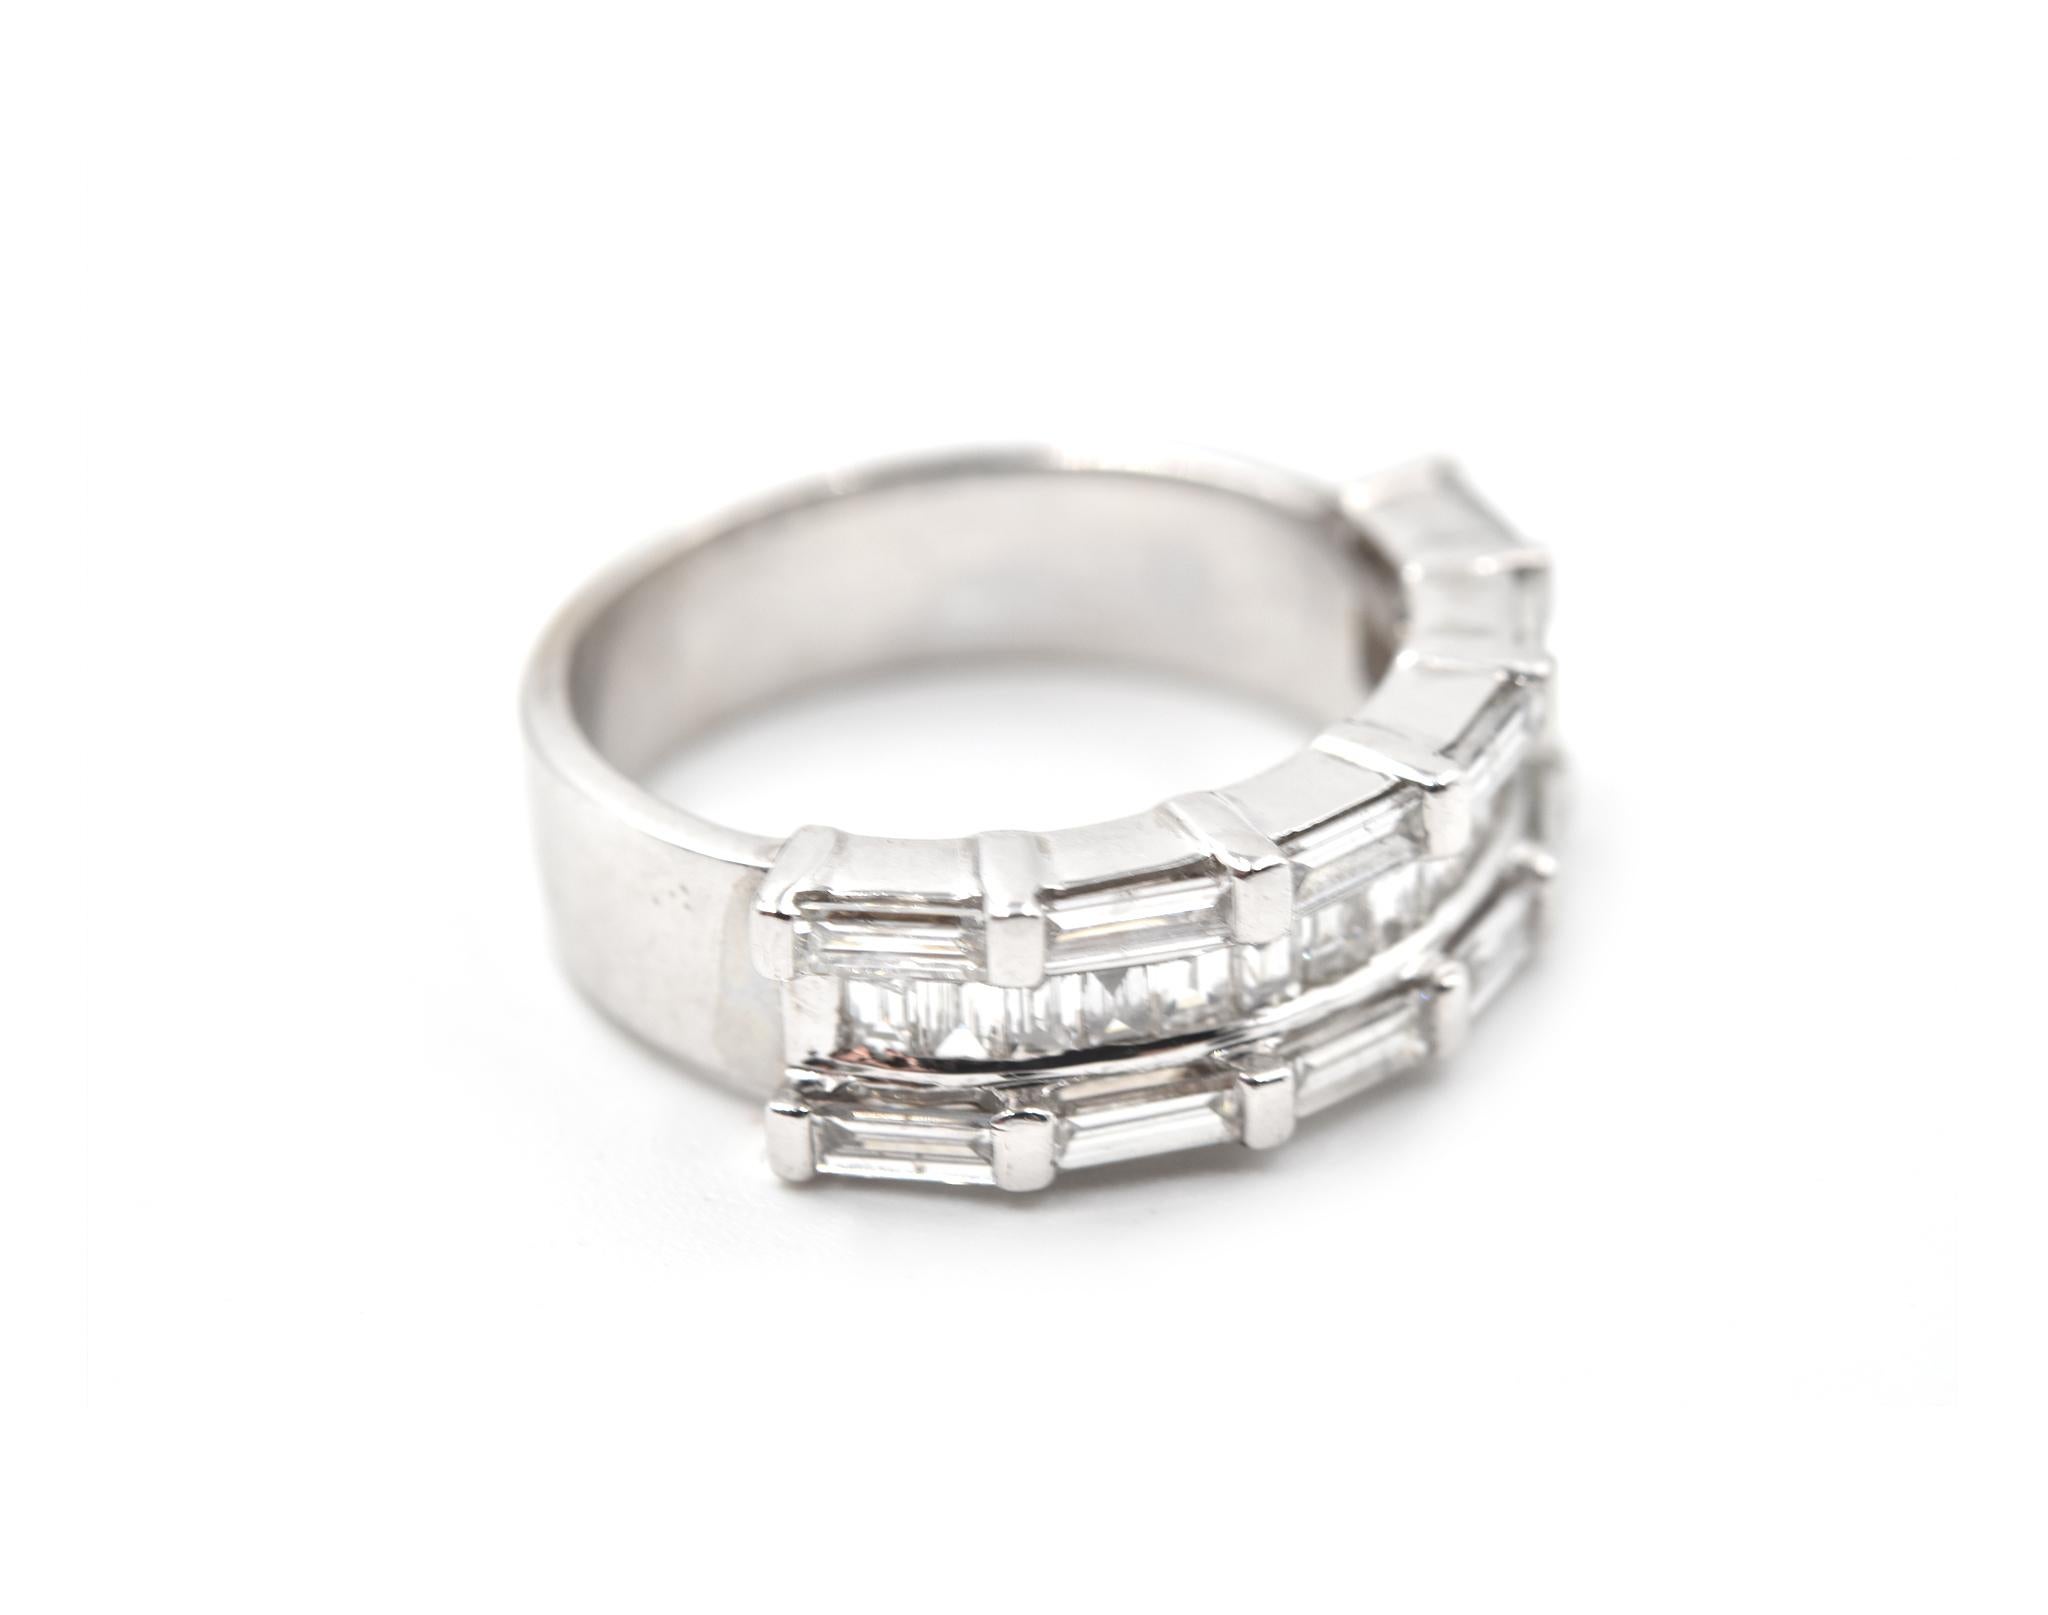 Designer: custom design
Material: 14k white gold
Diamonds: 12 baguette cut = 0.60cttw
Diamonds: 15 baguette cut= 0.15cttw
Color: H
Clarity: SI1
Ring size: 5 1/4 (please allow two additional shipping days for sizing requests)
Dimensions: ring top is